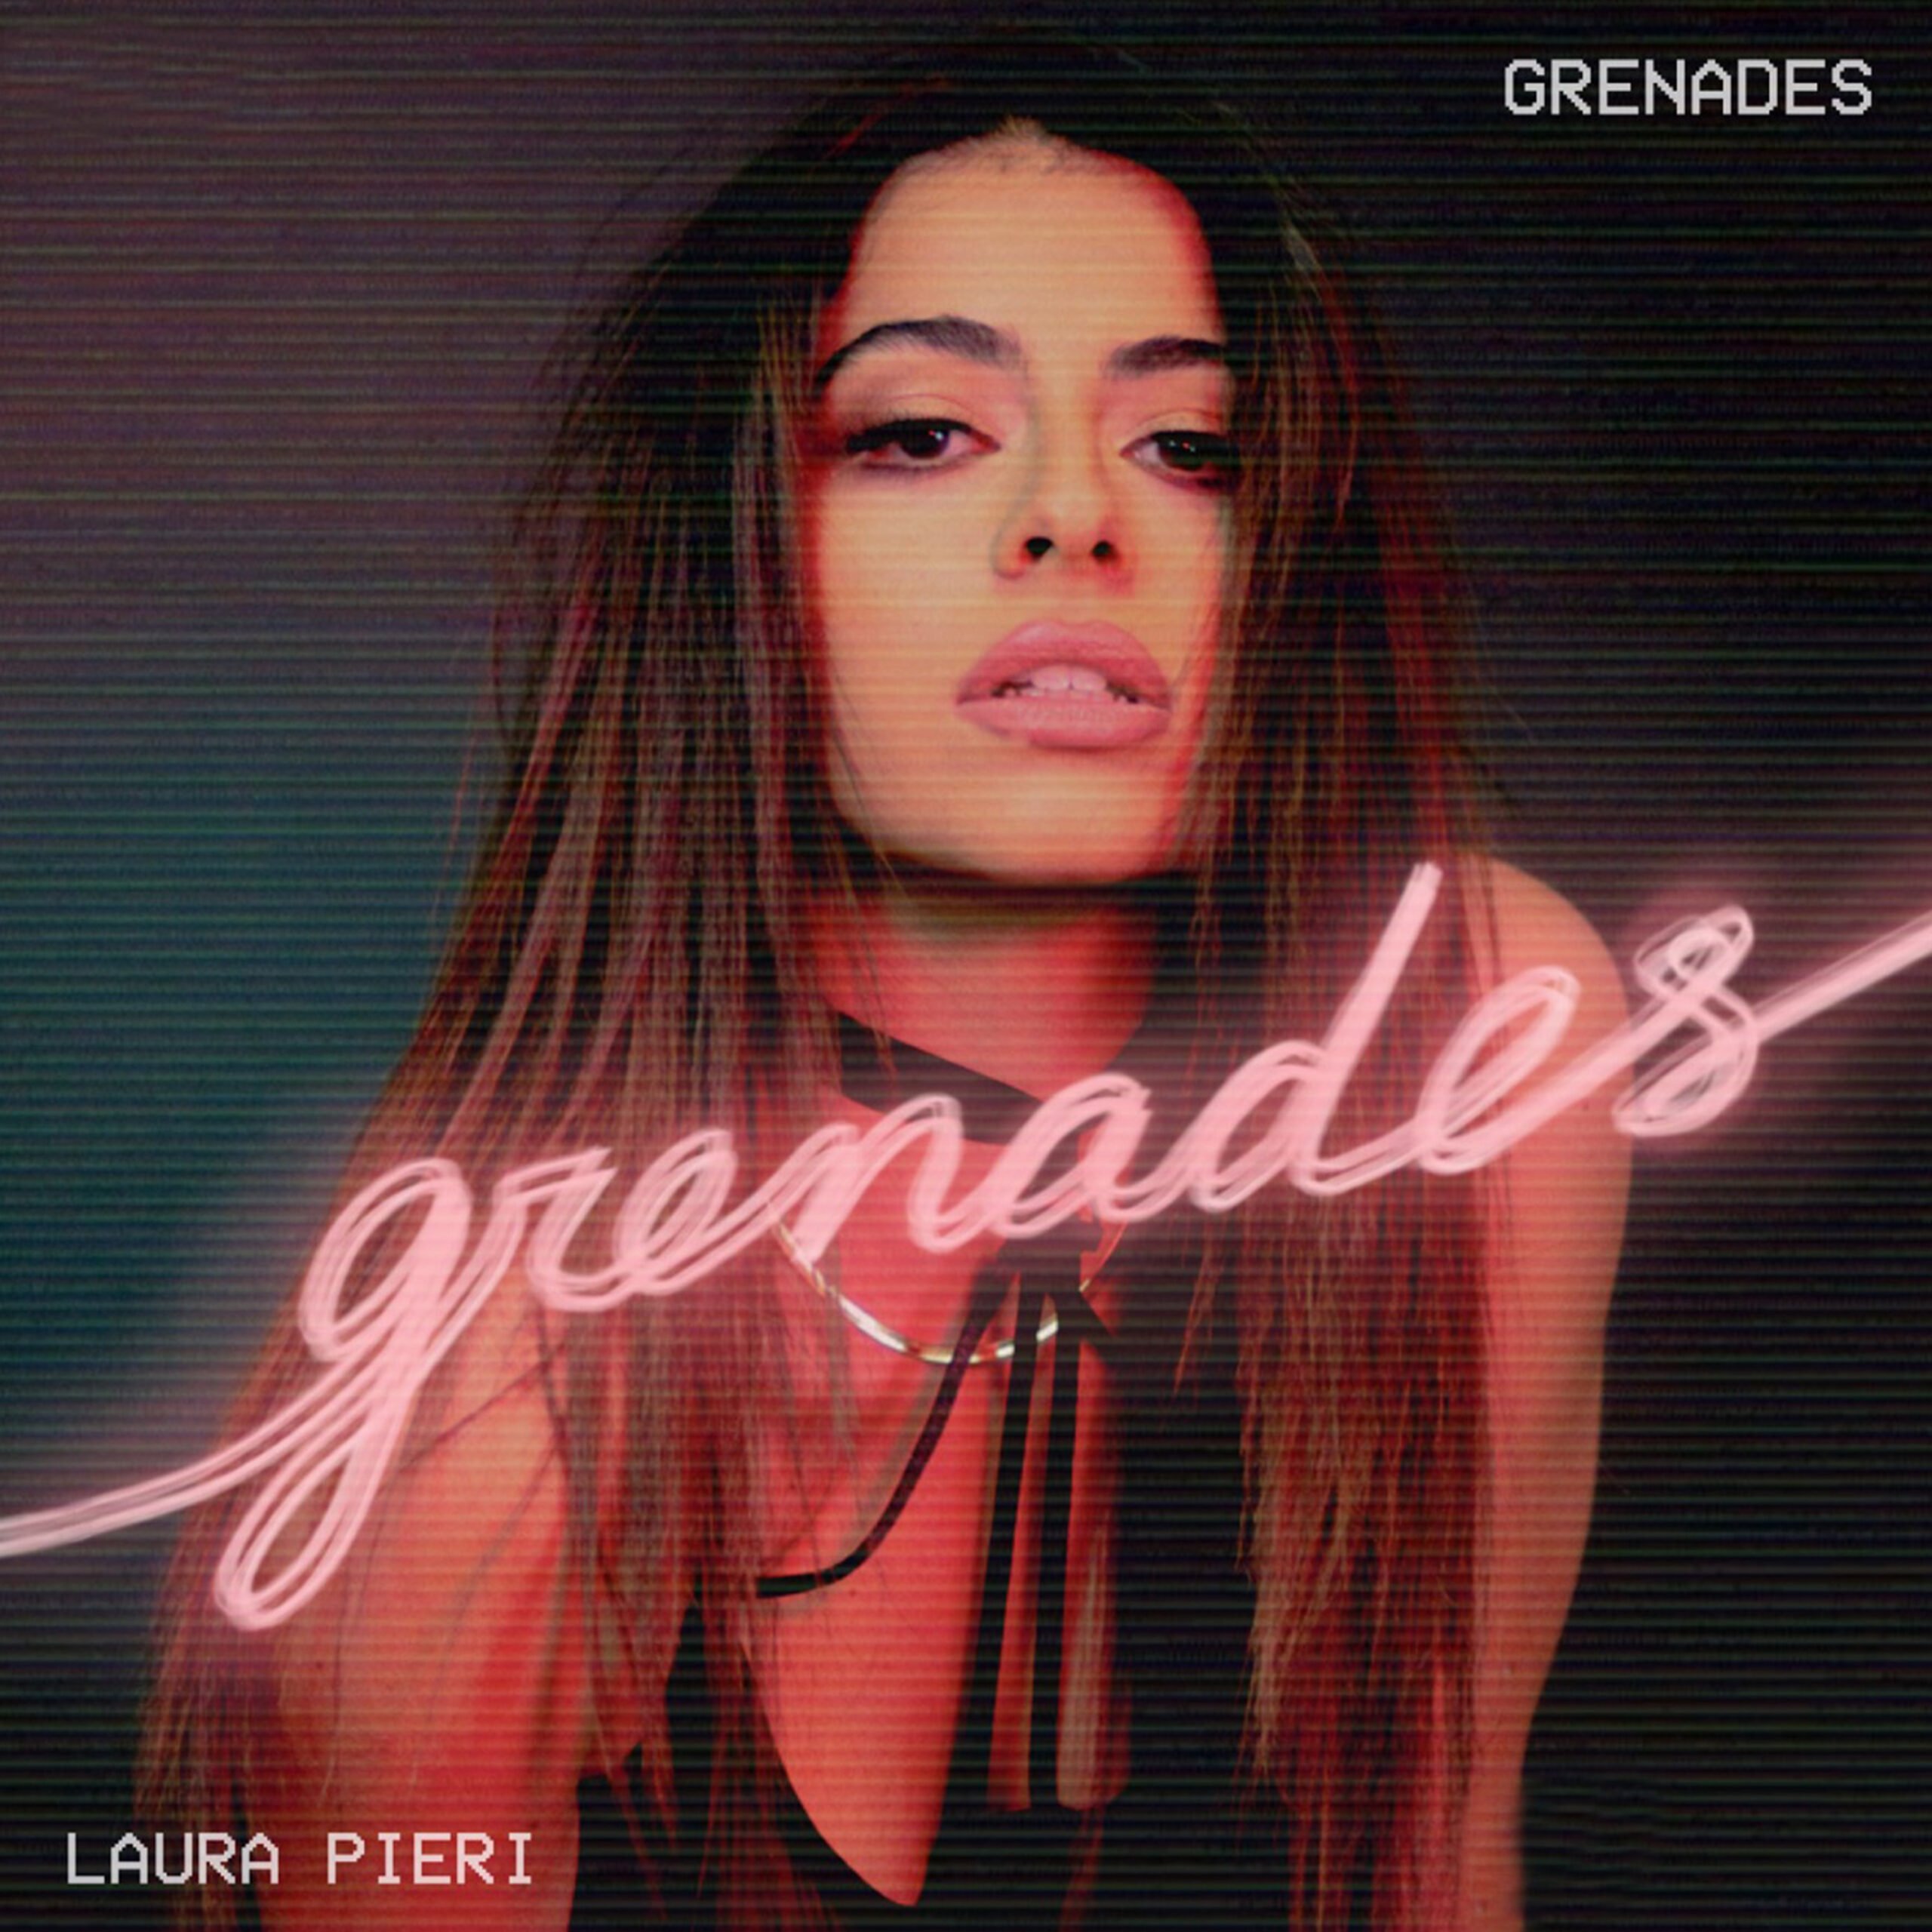 "Grenades" by Laura Pieri artwork by Corey Rooney Music Group for use by 360 Magazine